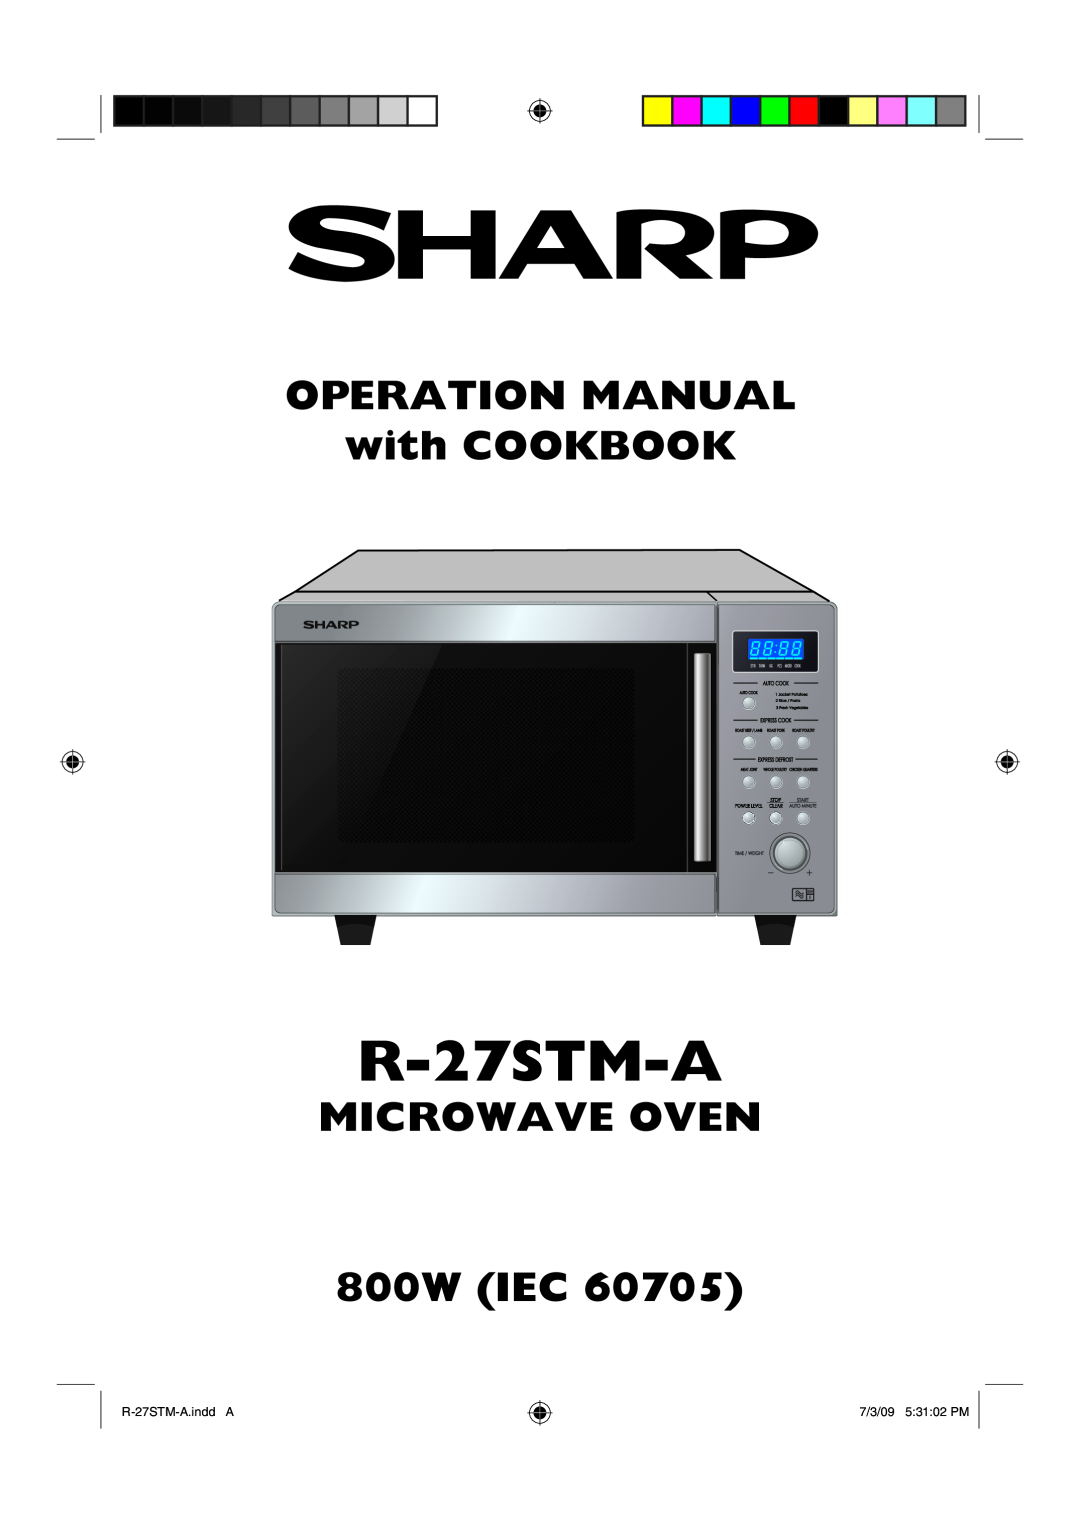 Sharp manual MICROWAVE OVEN 800W IEC, R-27STM-A.indd A, 7/3/09 53102 PM 